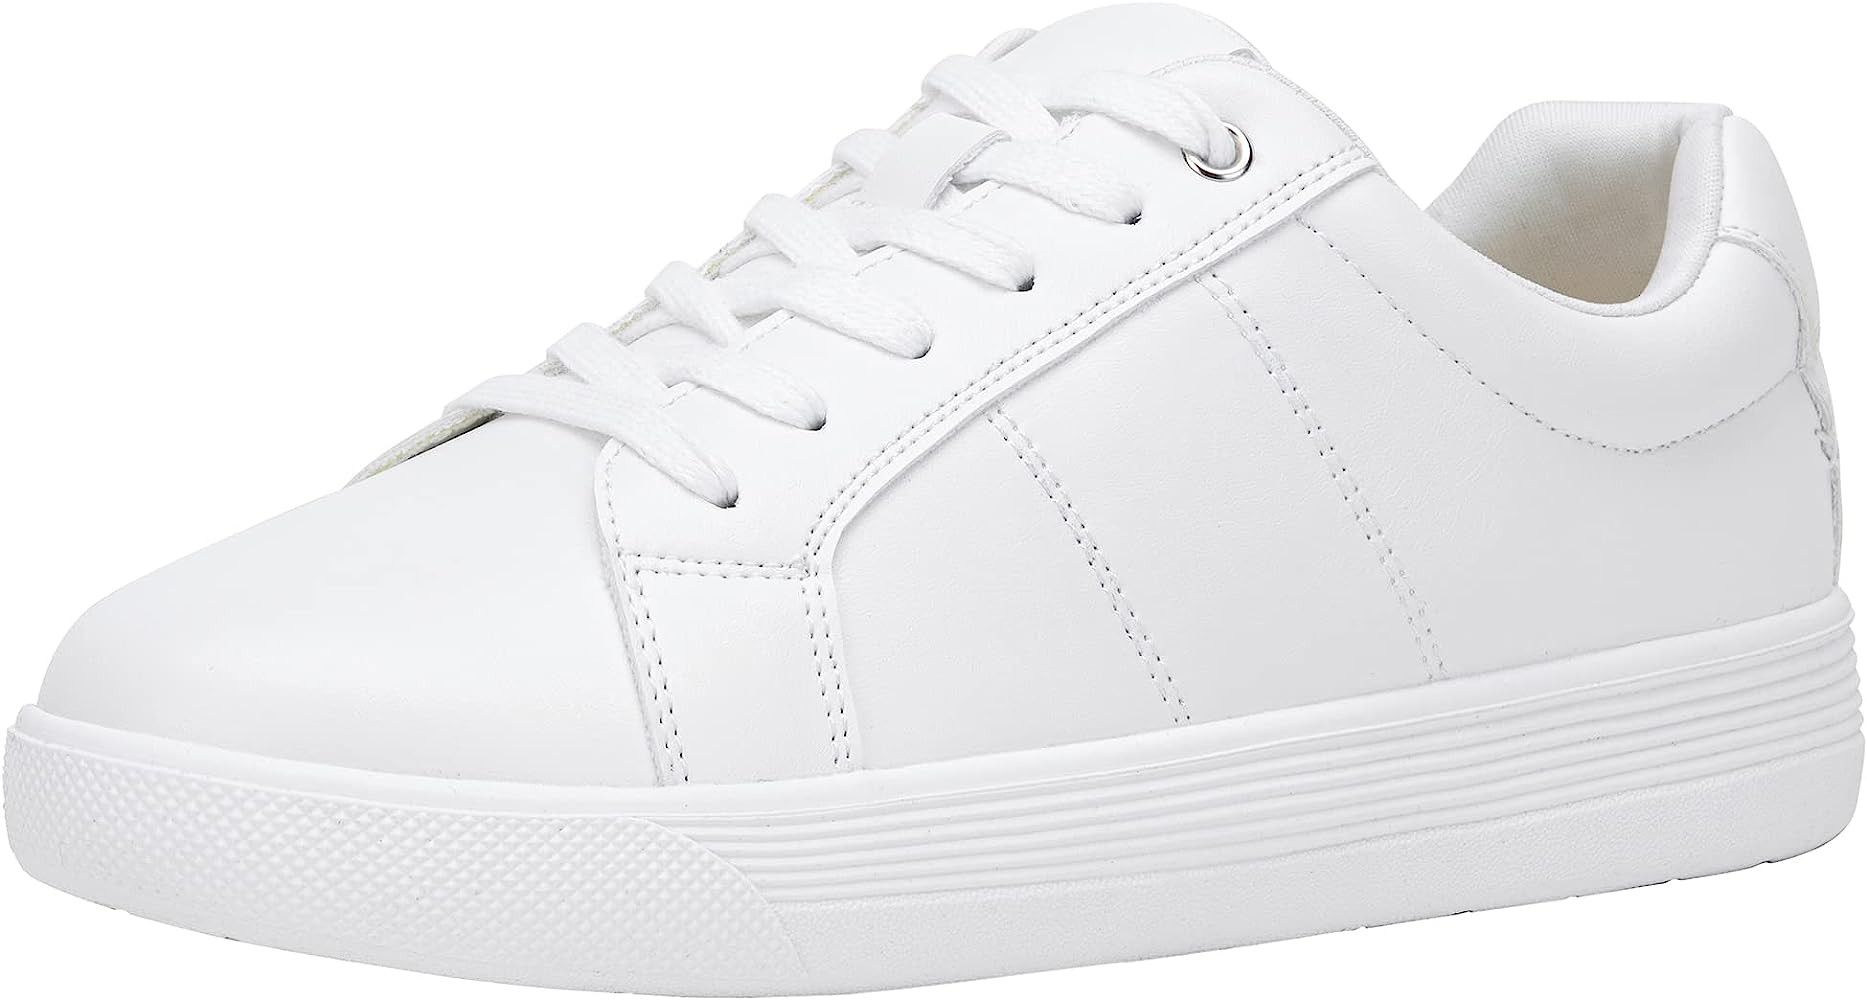 Vepose White Sneakers 8013 Casual Fashion Low Top Comfortable Classic Shoes | Amazon (US)